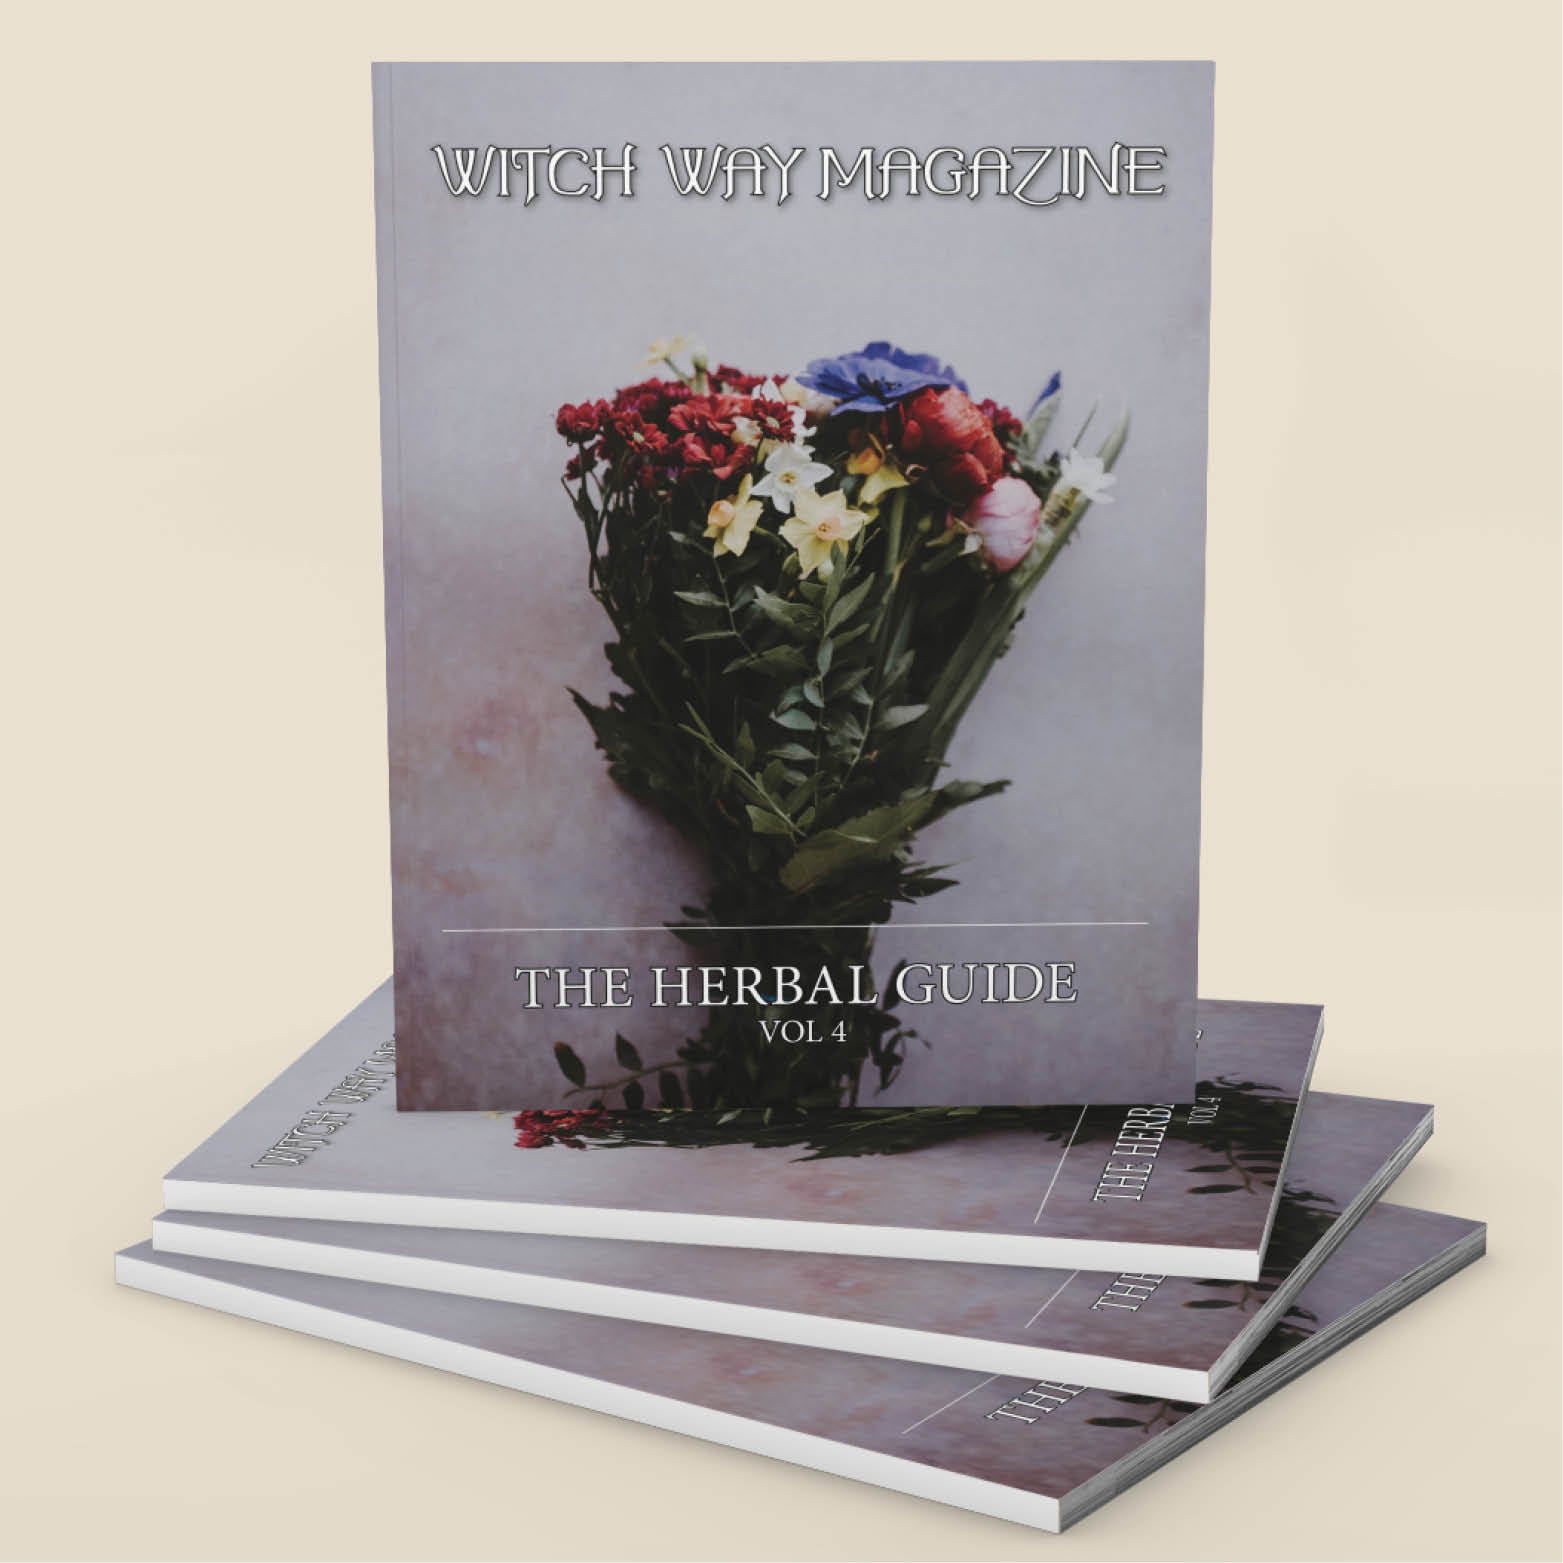 Witch Way Magazine 2019 Herbal Guide -  Vol 4 - Printed